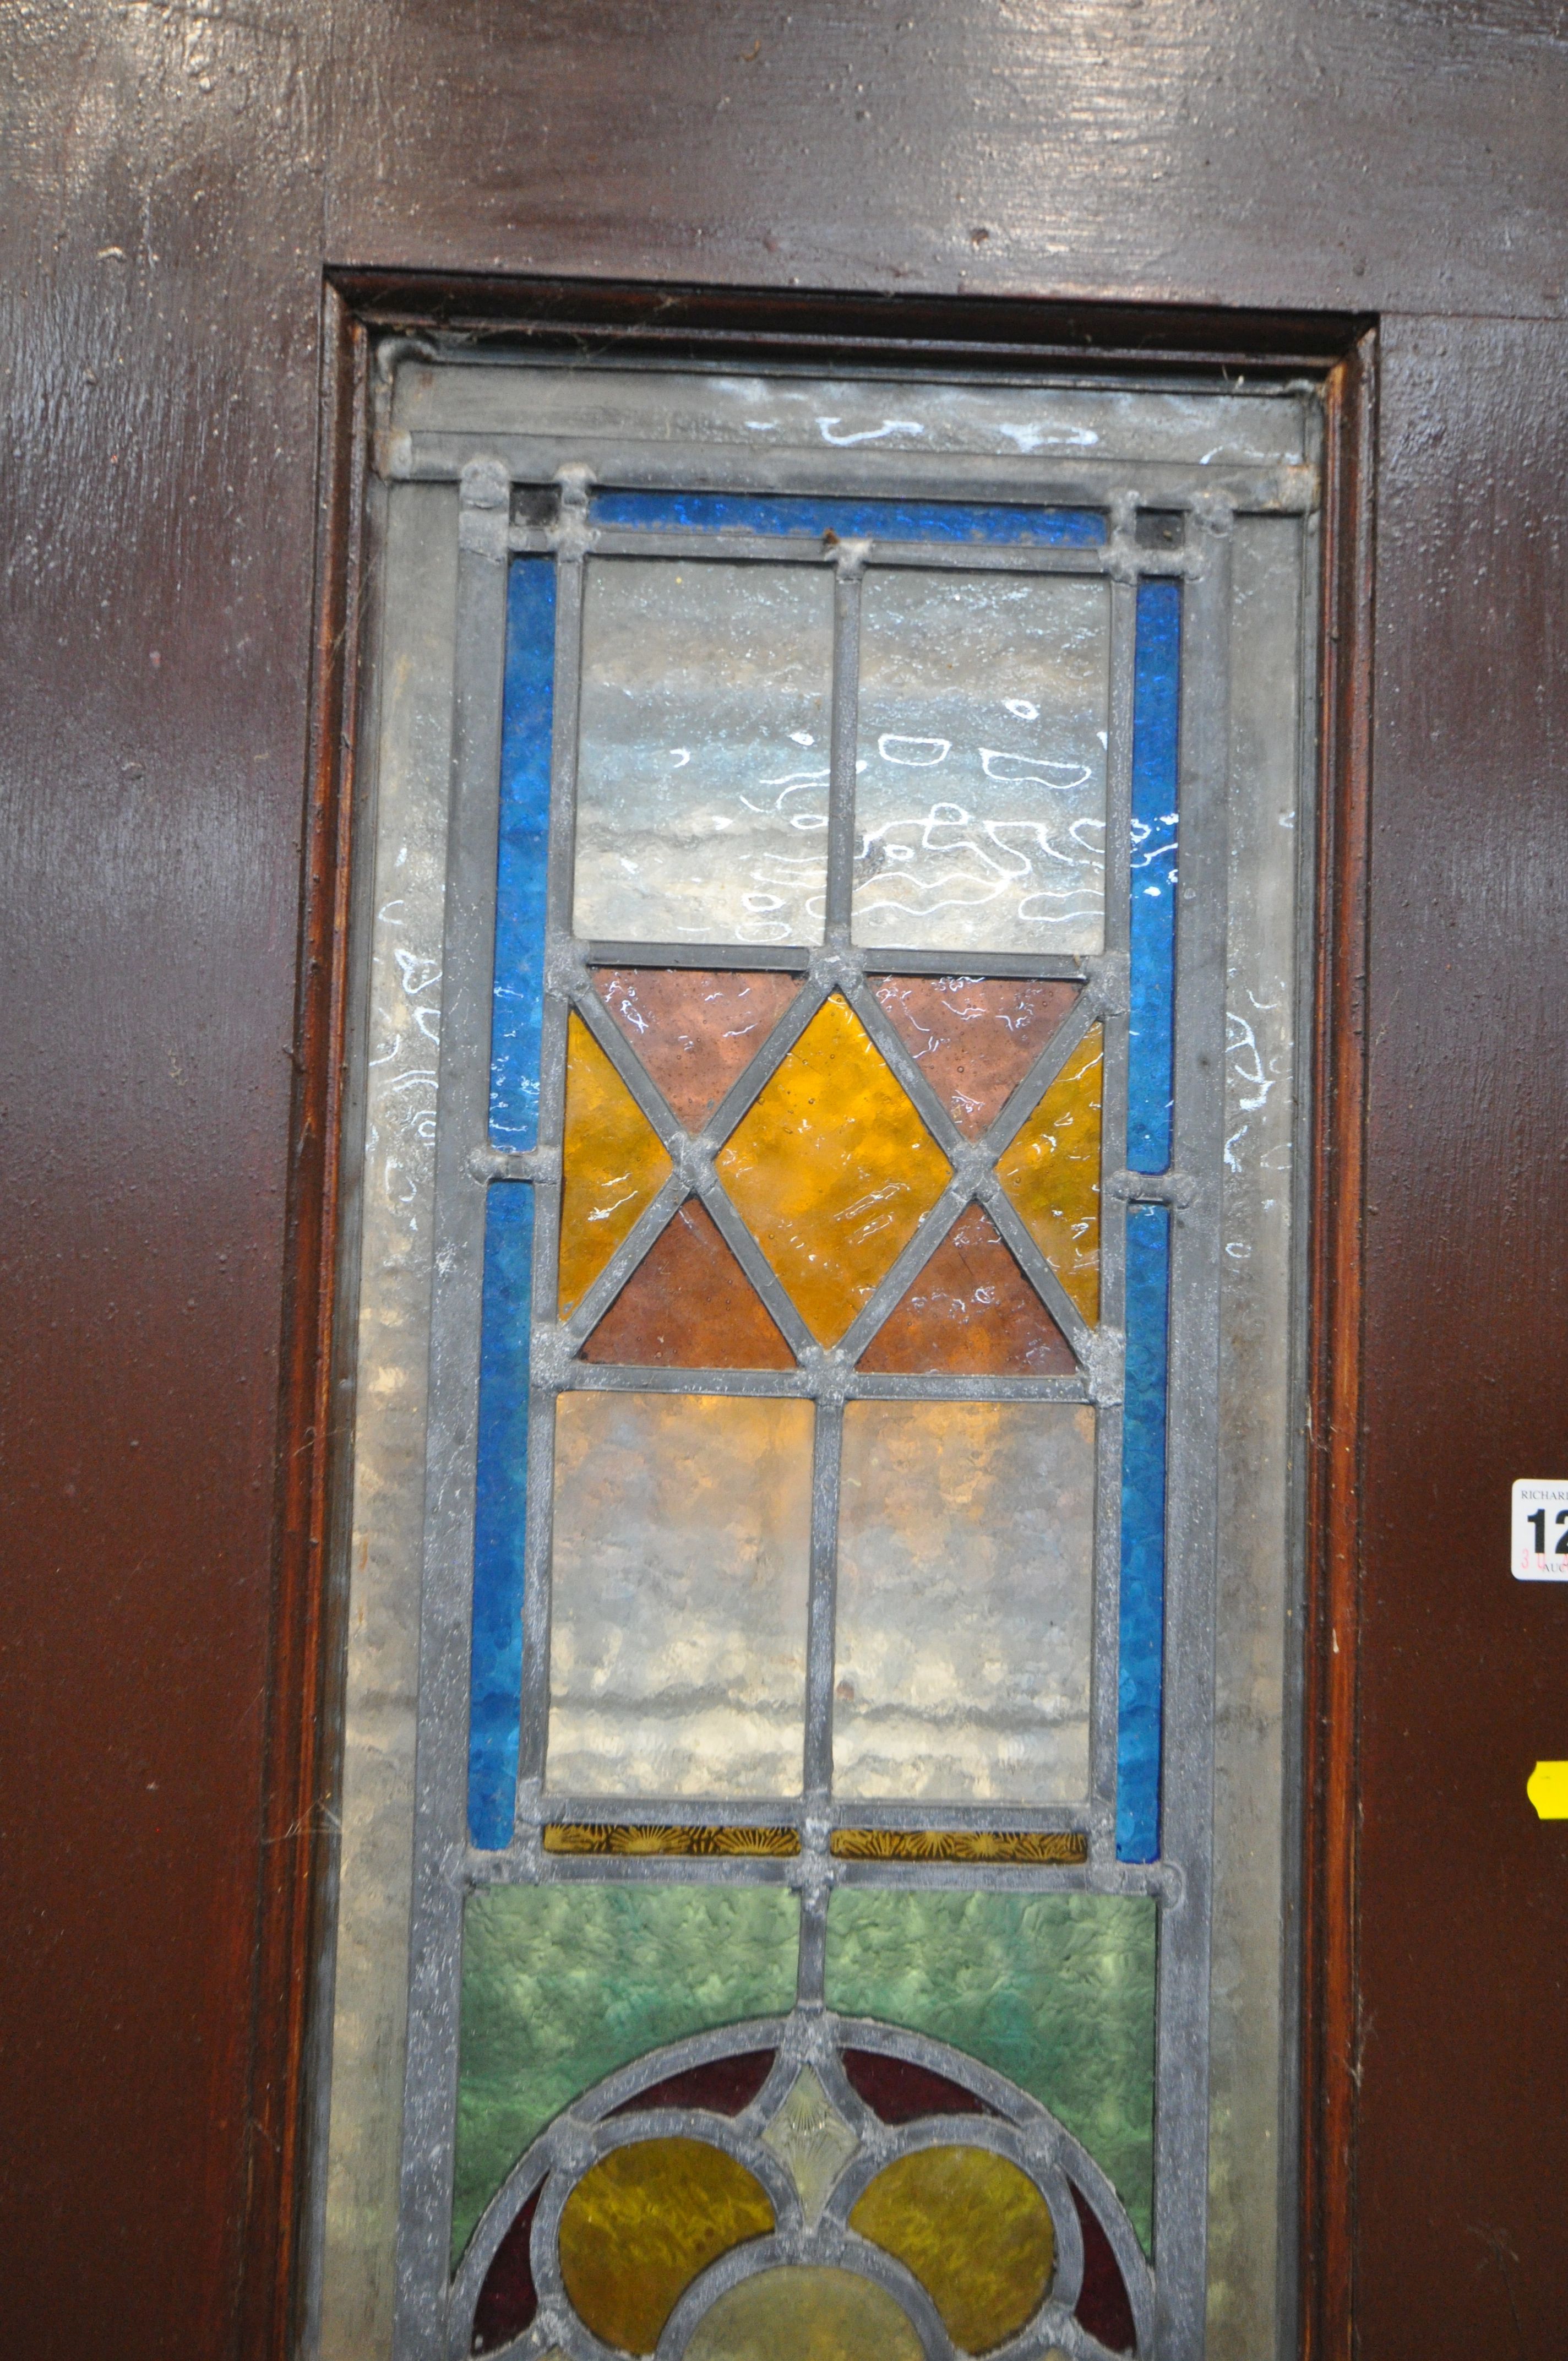 FOUR SIZED INTERNAL DOORS, each with lead glazed stain glass windows, depicting various patterns and - Image 6 of 10